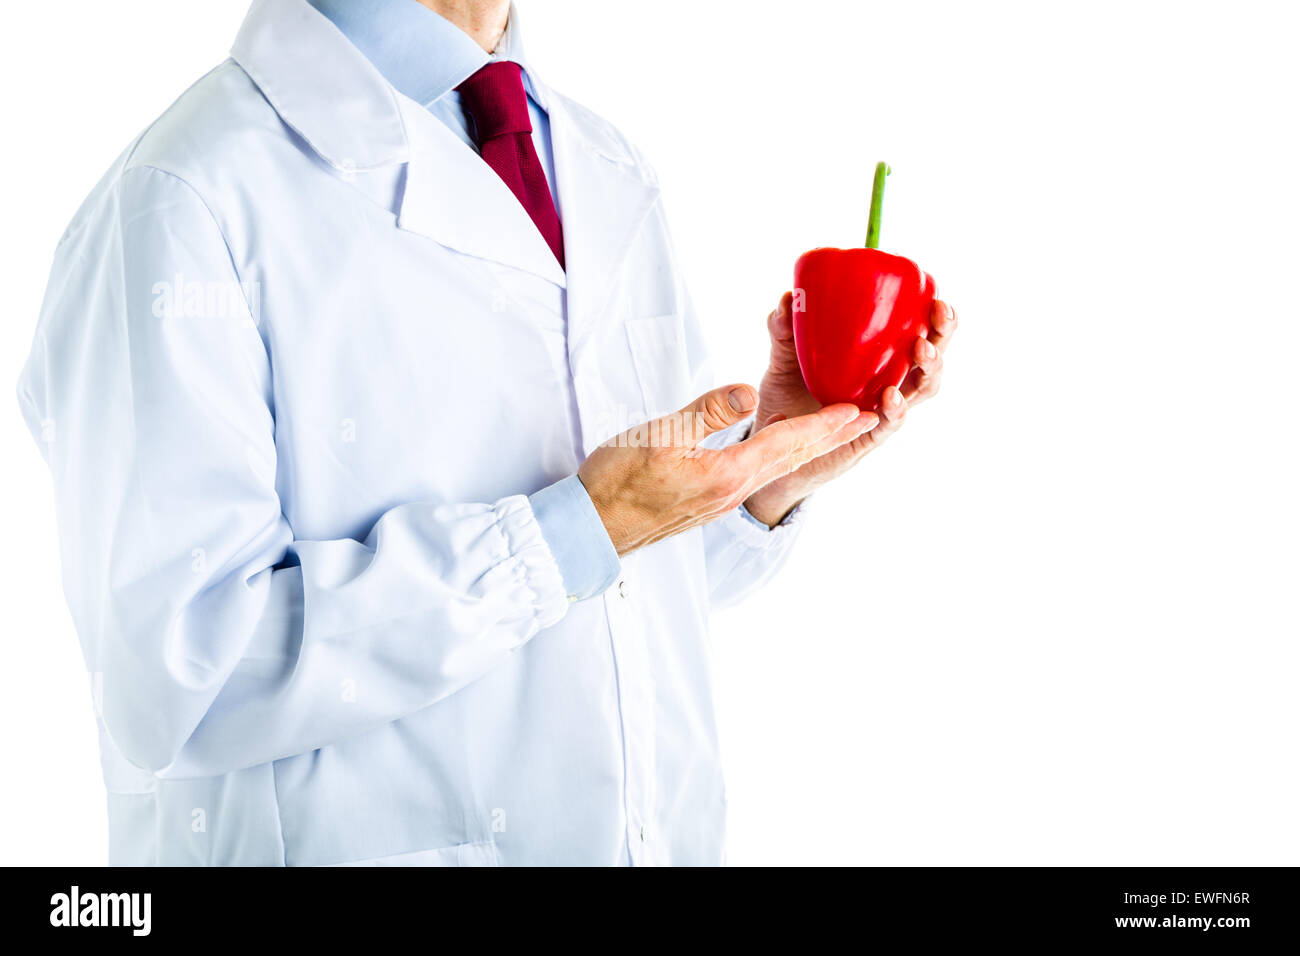 Caucasian male doctor dressed in white coat, blue shirt and red tie is showing a red pepper Stock Photo